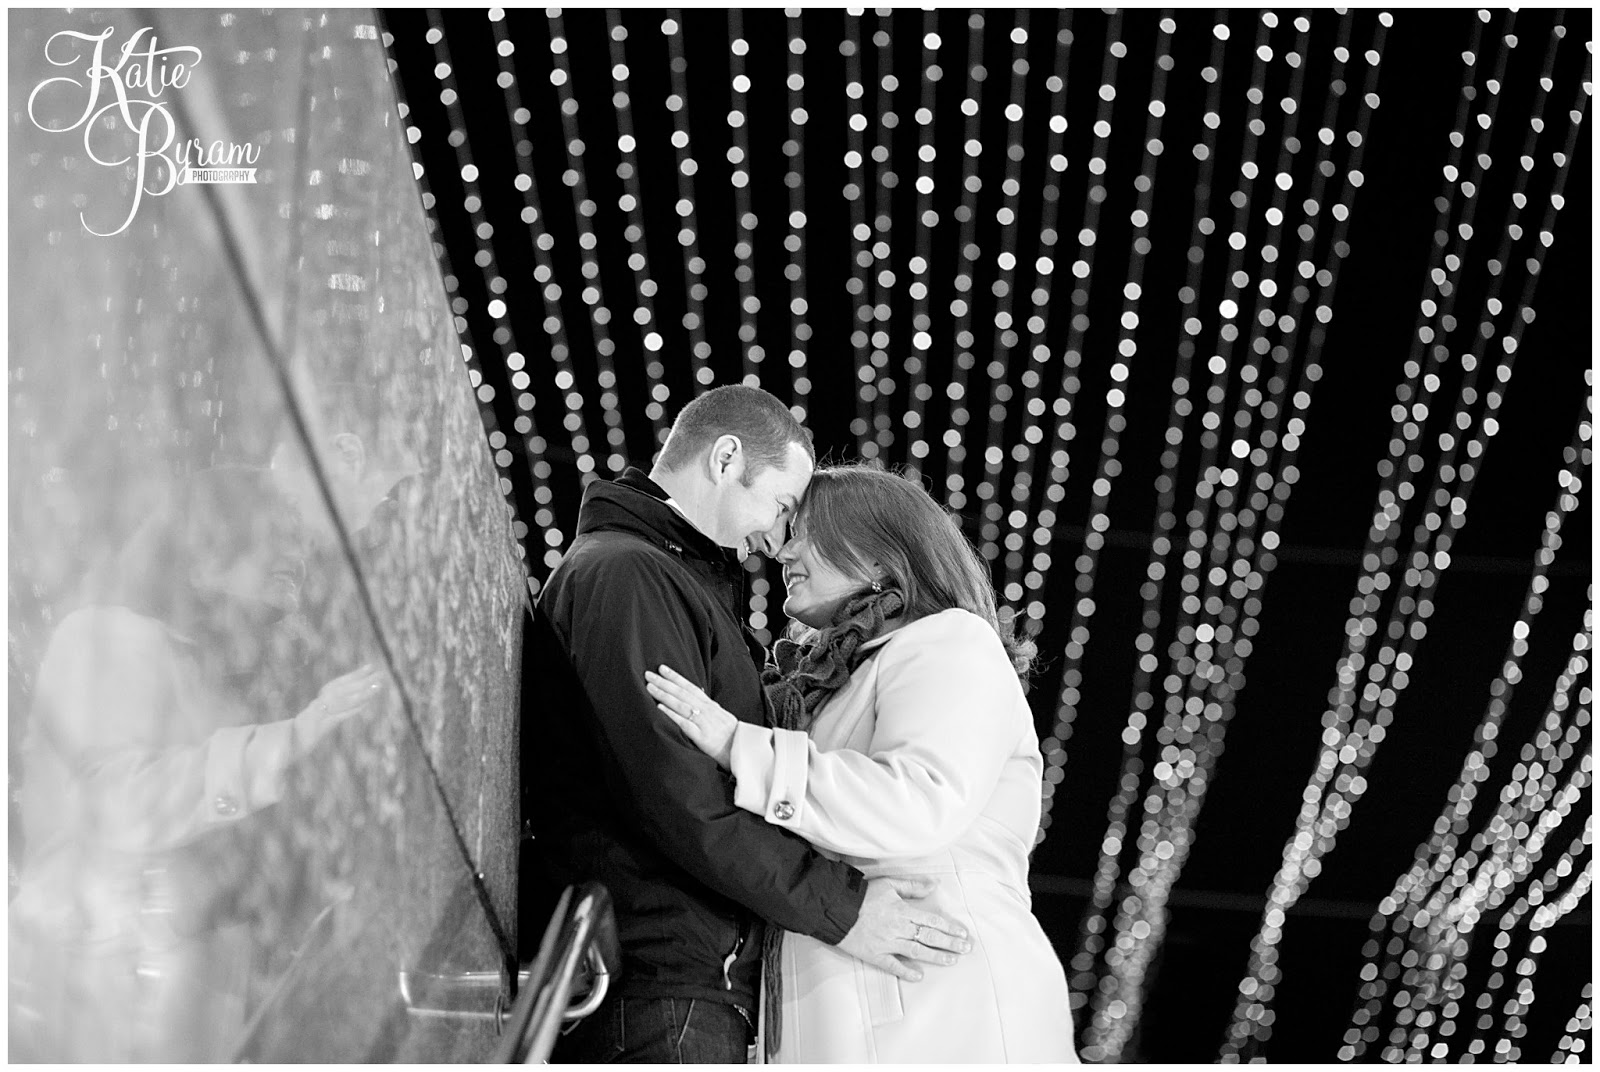 newcastle quayside engagement, newcastle pre-wedding shoot, newcastle quayside portraits, tyne bride engagement, christmas in newcastle, fenwicks window, millenium bridge engagement, pitcher and piano newcastle, olive and bean cafe, the baltic wedding, newcastle wedding photographer, katie byram photography